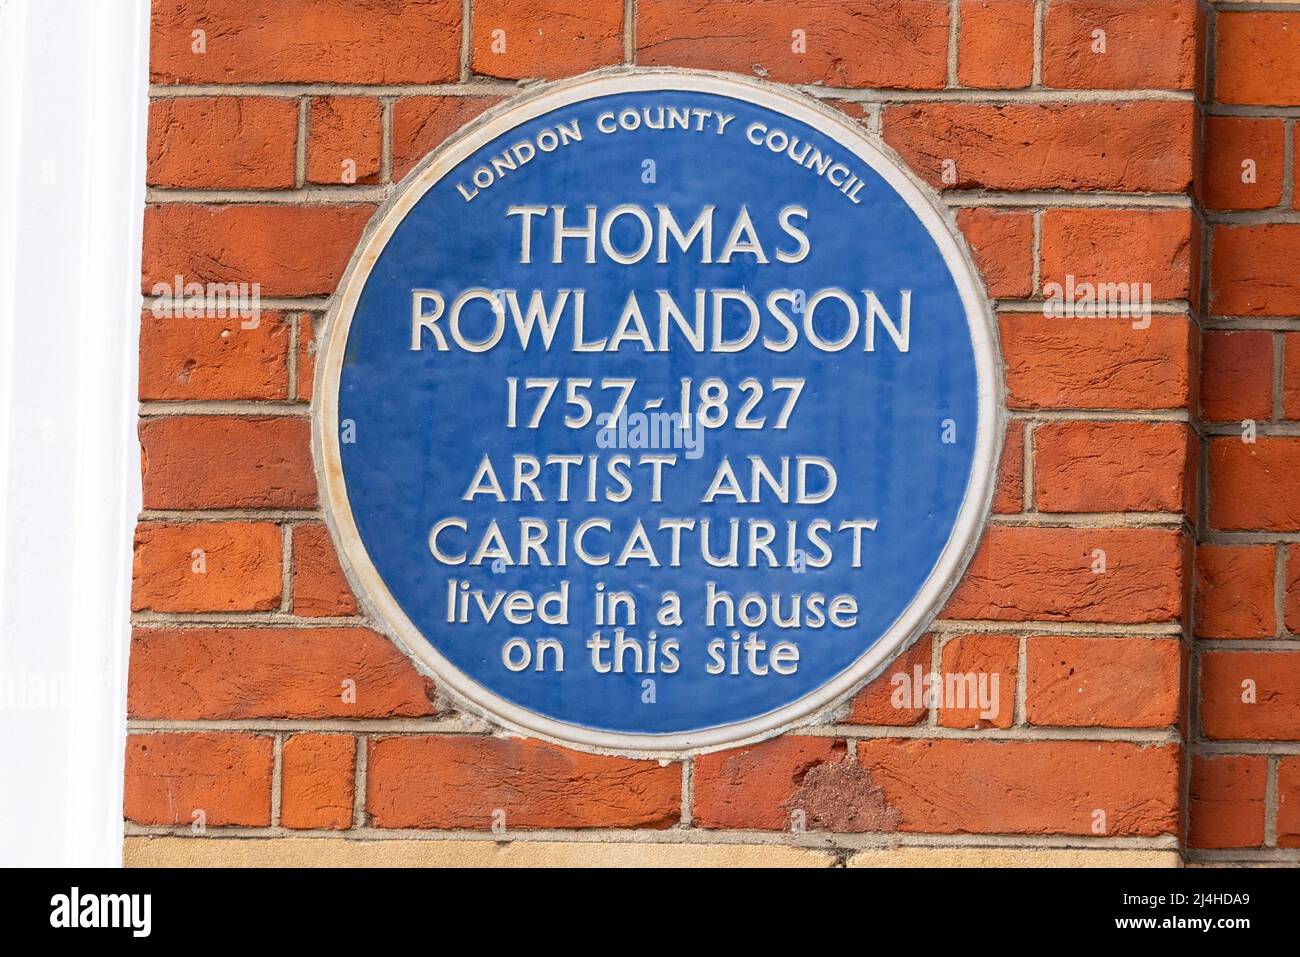 Thomas Rowlandson, blue plaque. Honoured by London County Council honouring the artist and caricaturist who lived in a house here, John Adam Street Stock Photo